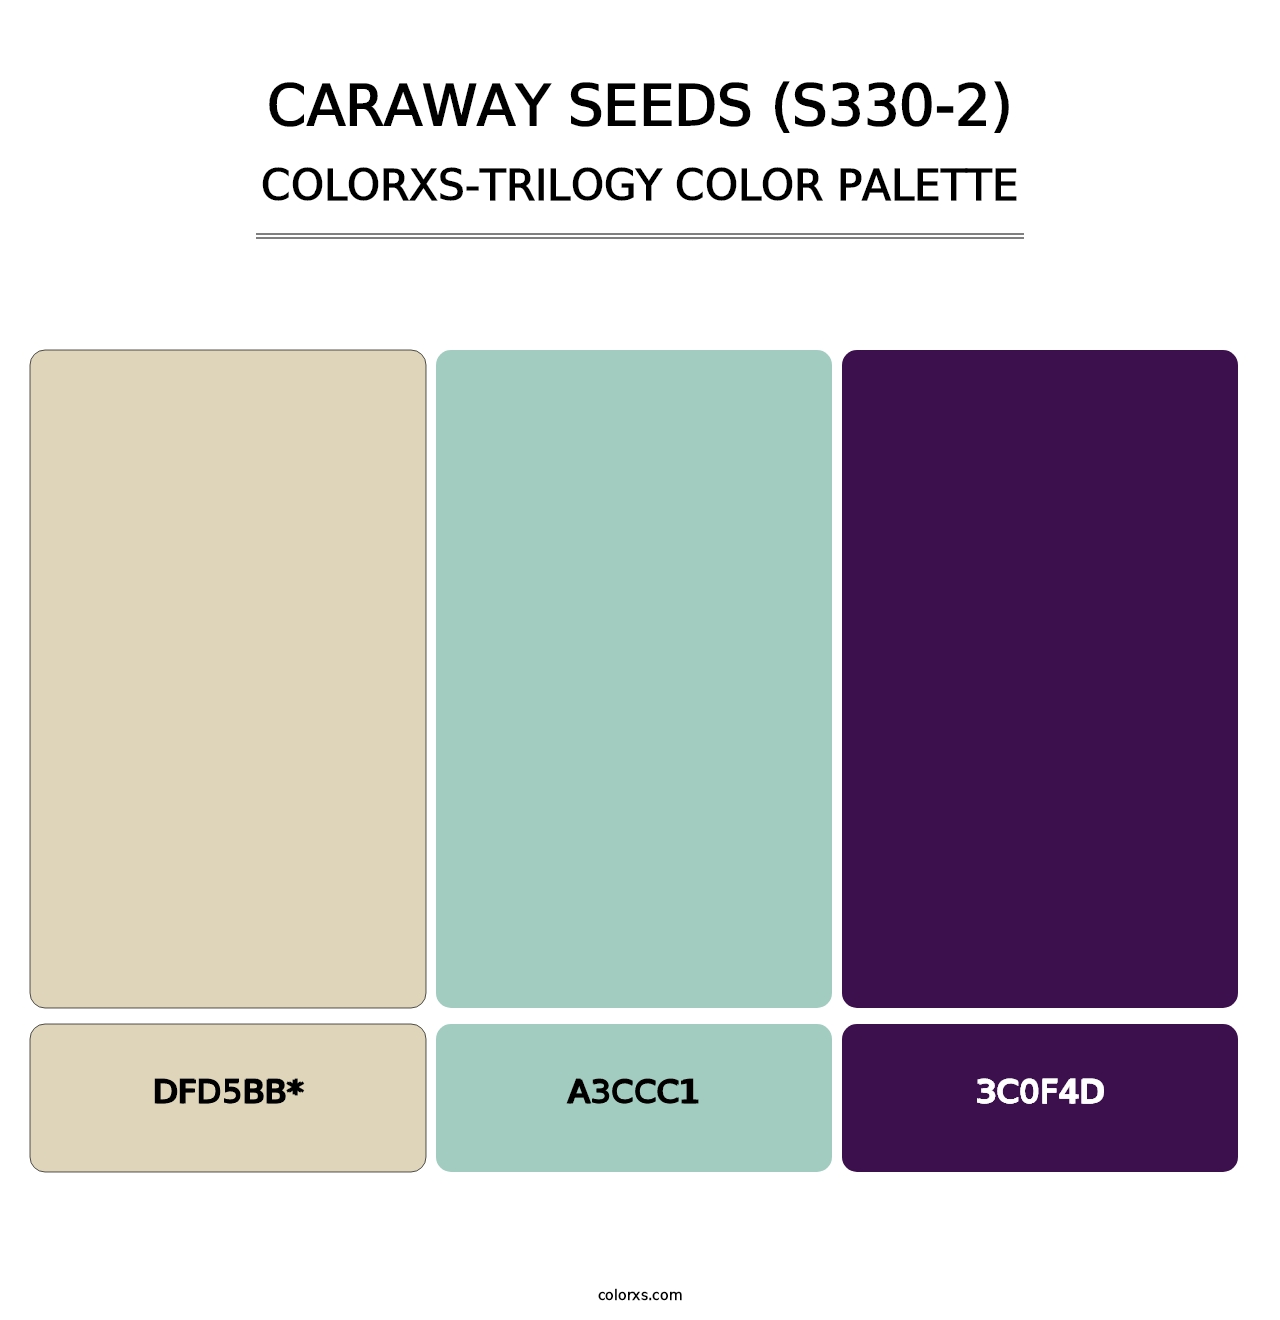 Caraway Seeds (S330-2) - Colorxs Trilogy Palette